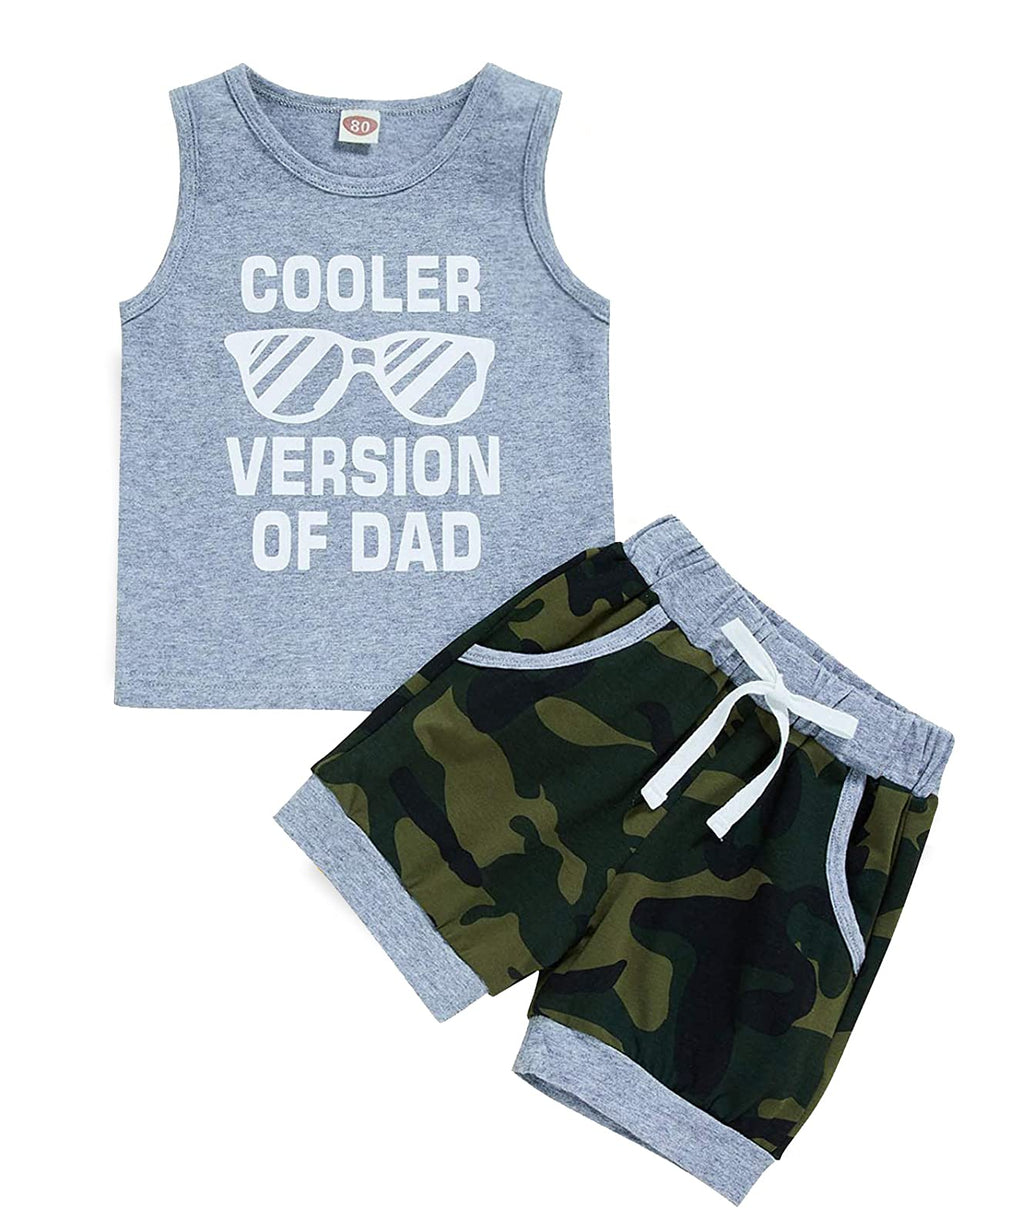 [Australia] - Viworld Baby Boy Summer Short Set Toddler Letter Print Sleeveless Tank Top+Camouflage Pants 2PCS Clothes Outfit Gray-a 6-12 Months 